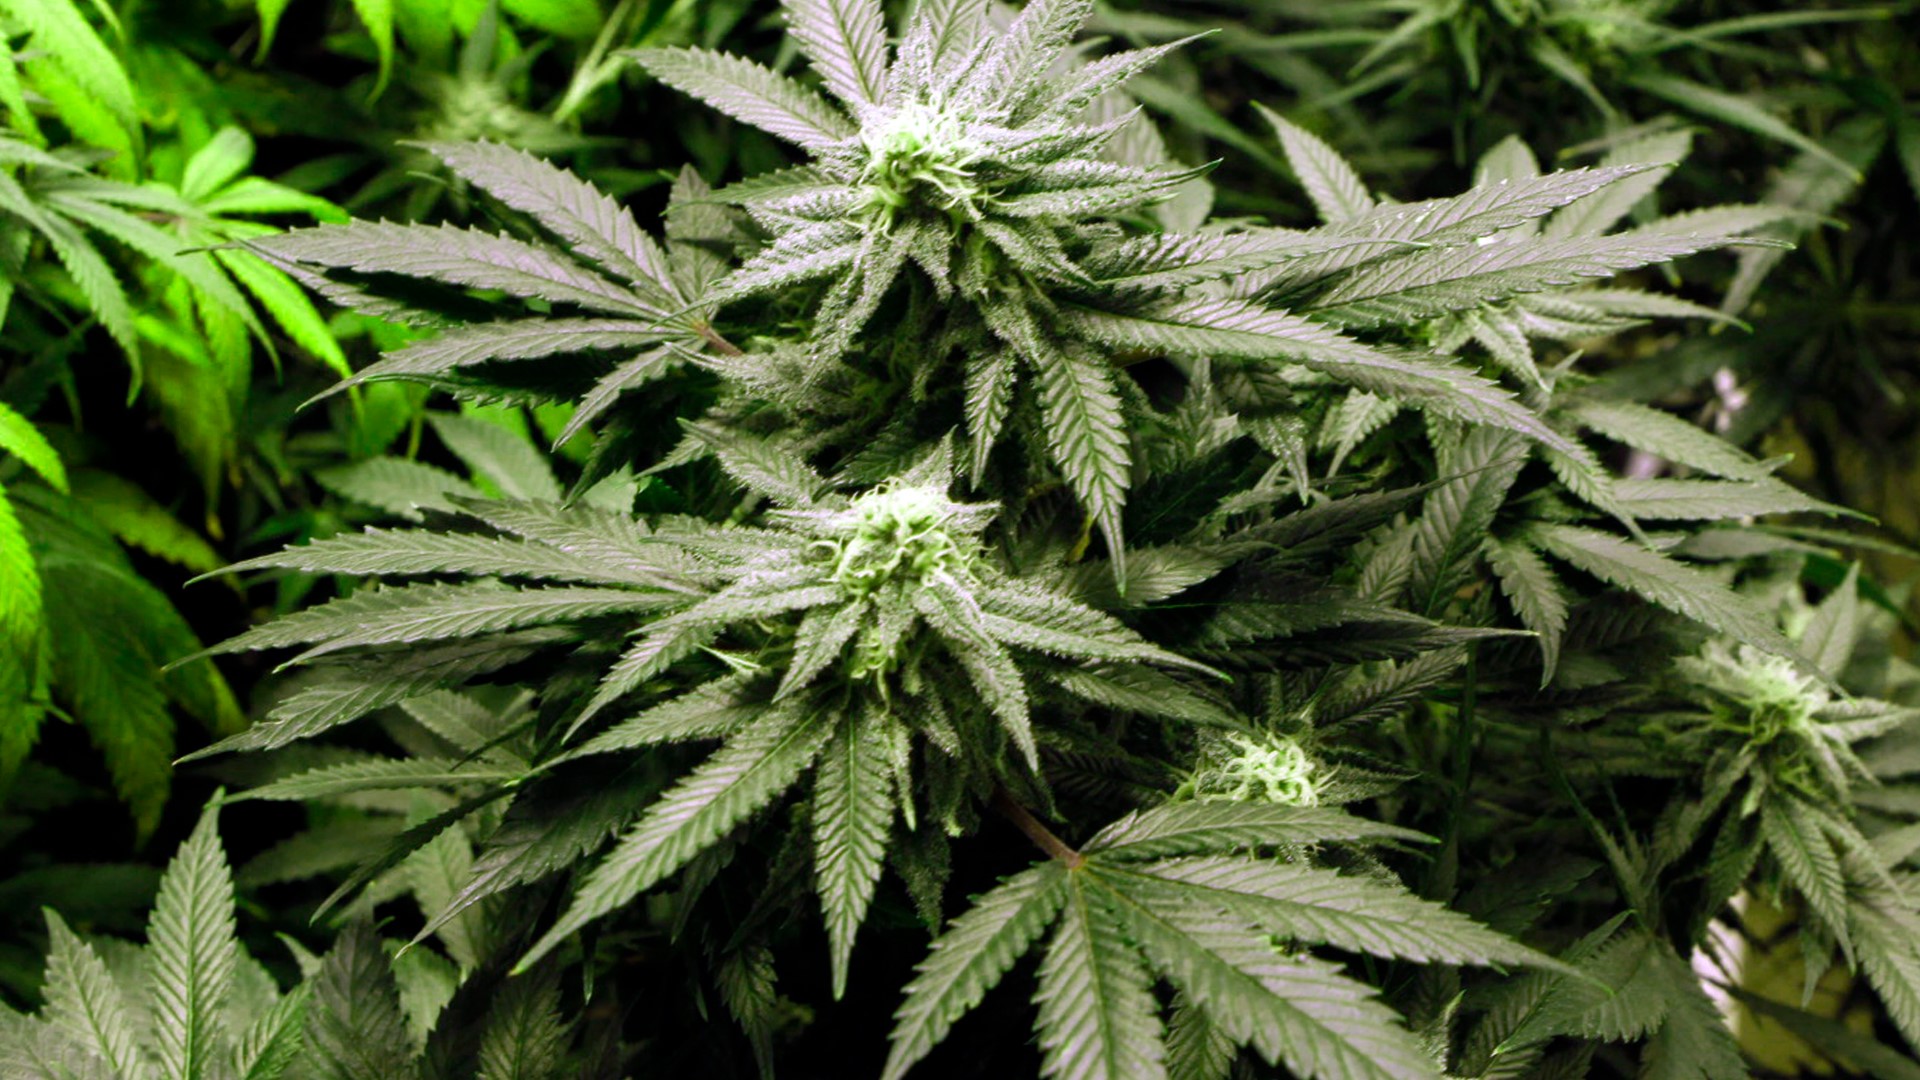 Voters in Maryland will decide on legalizing recreational marijuana this year.